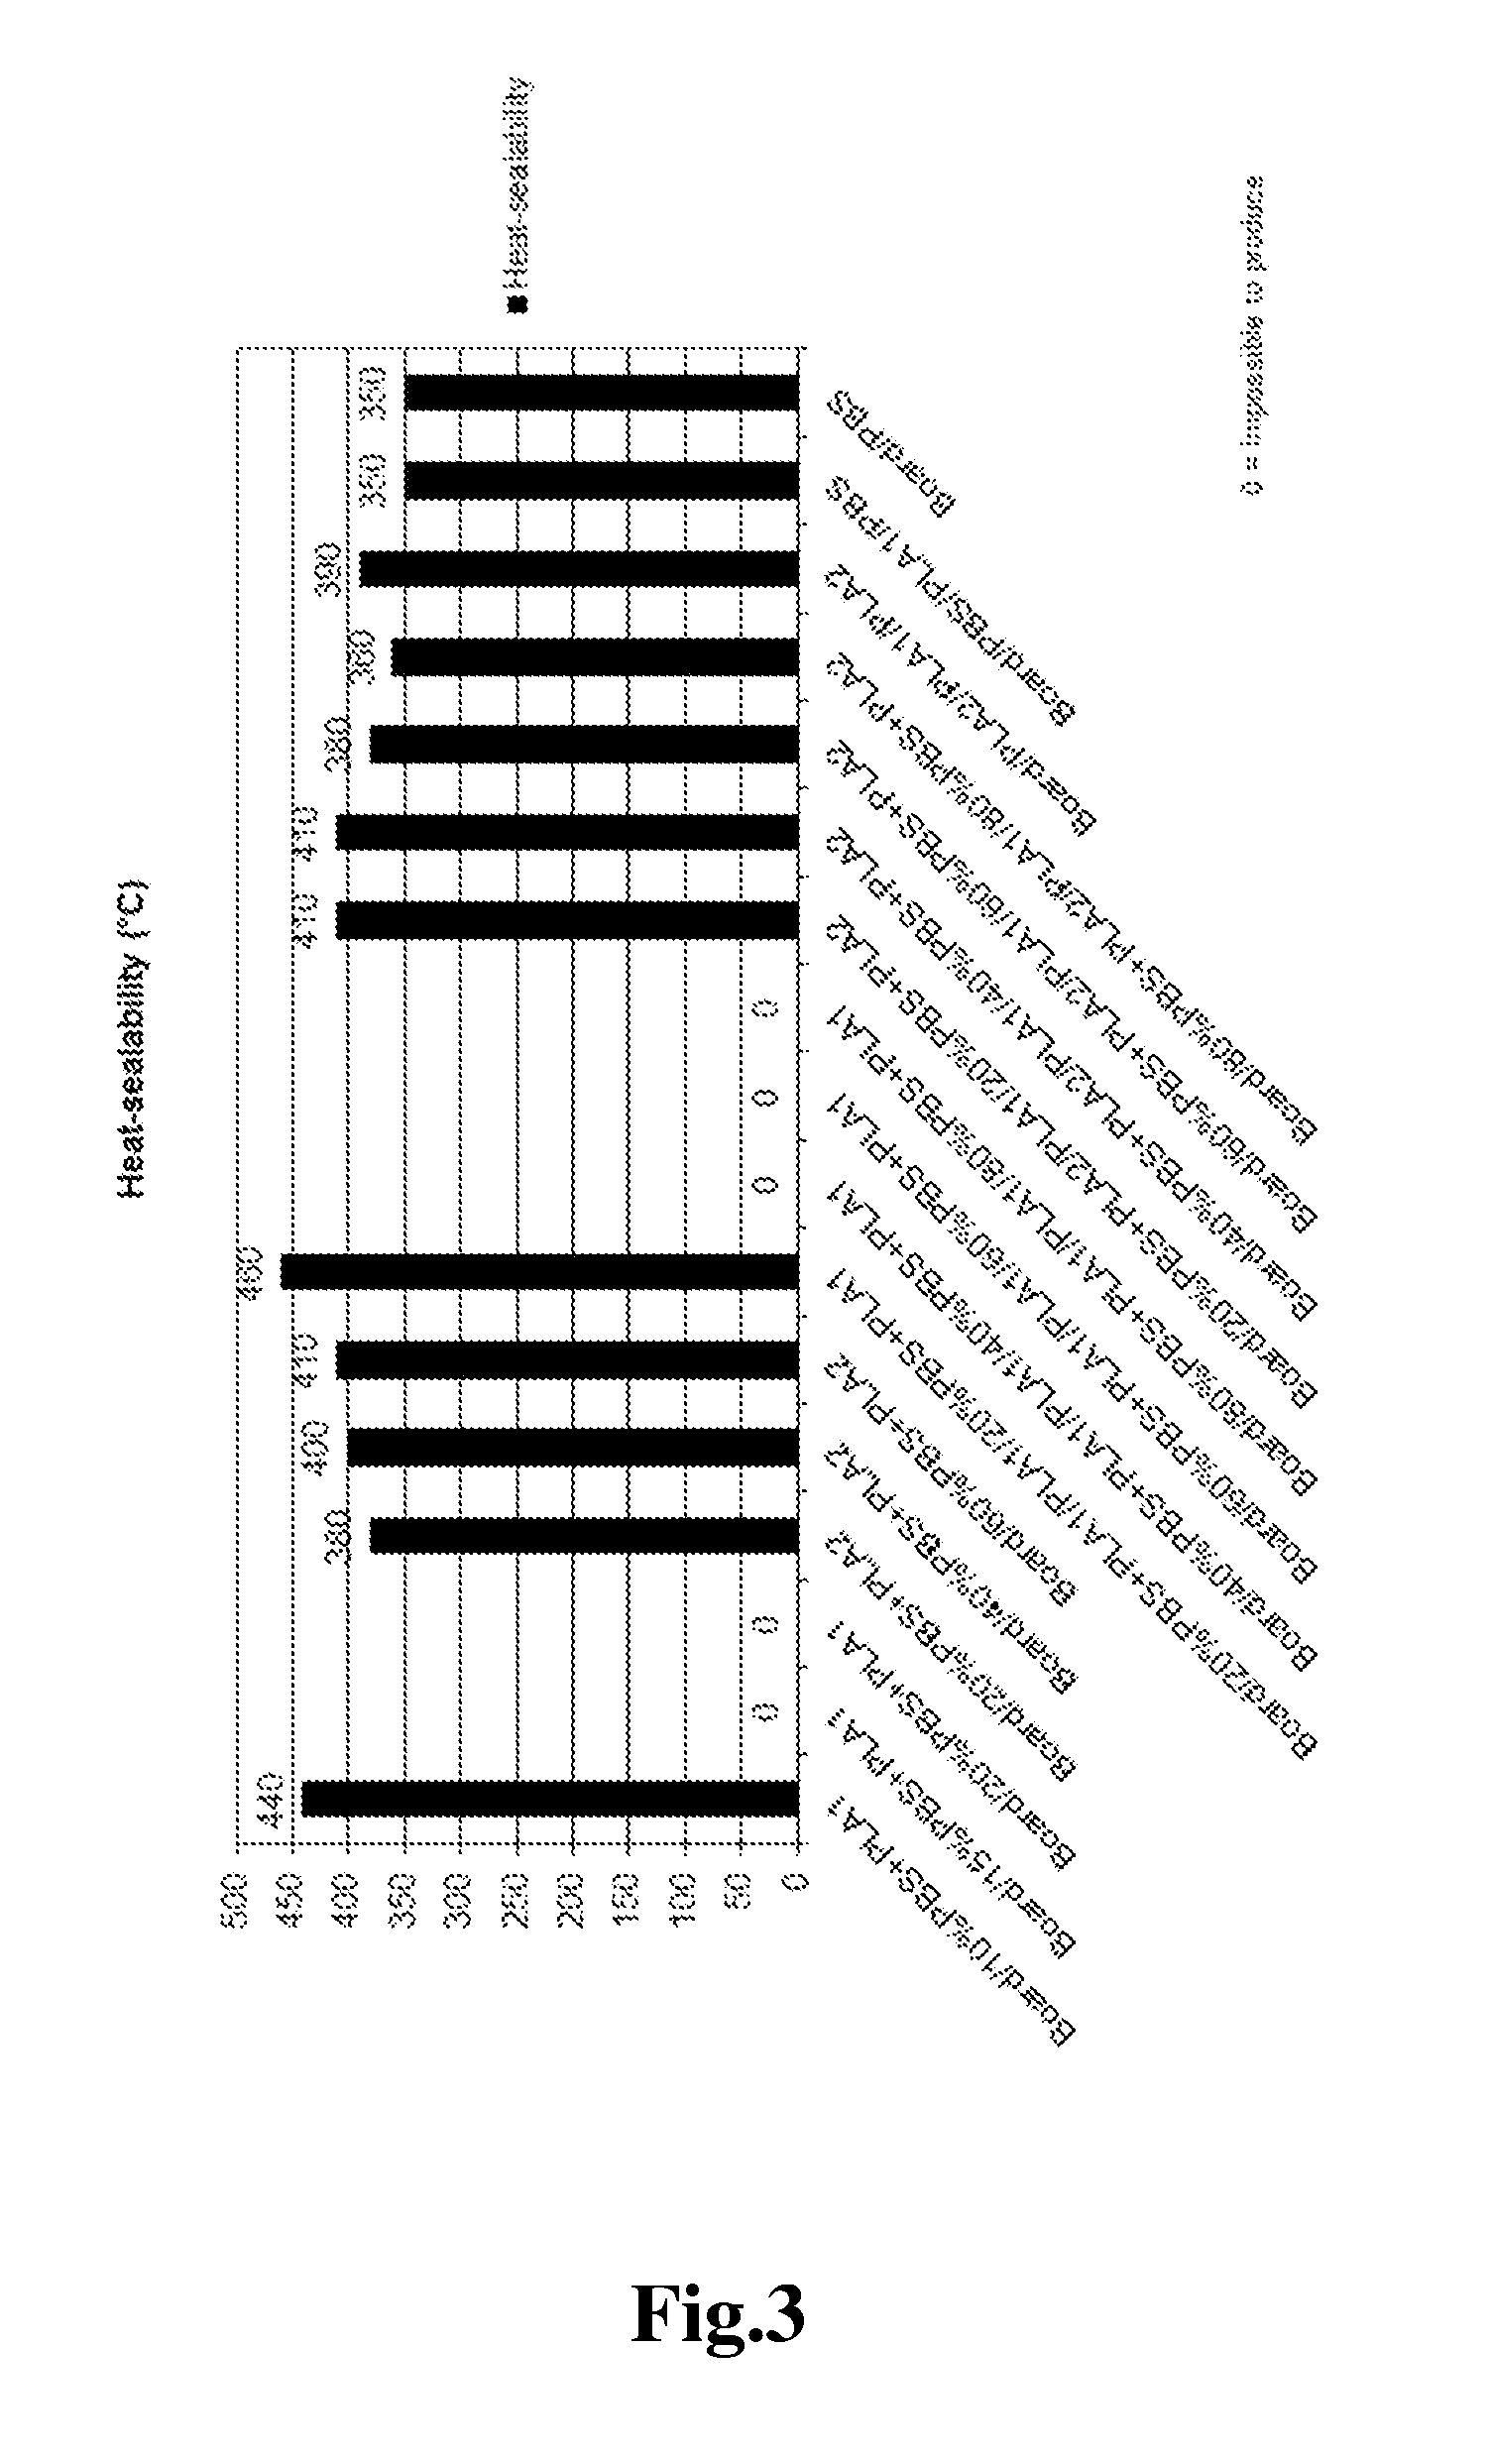 Method for manufacturing biodegradable packaging material, biodegradable packaging material and a package or a container made thereof